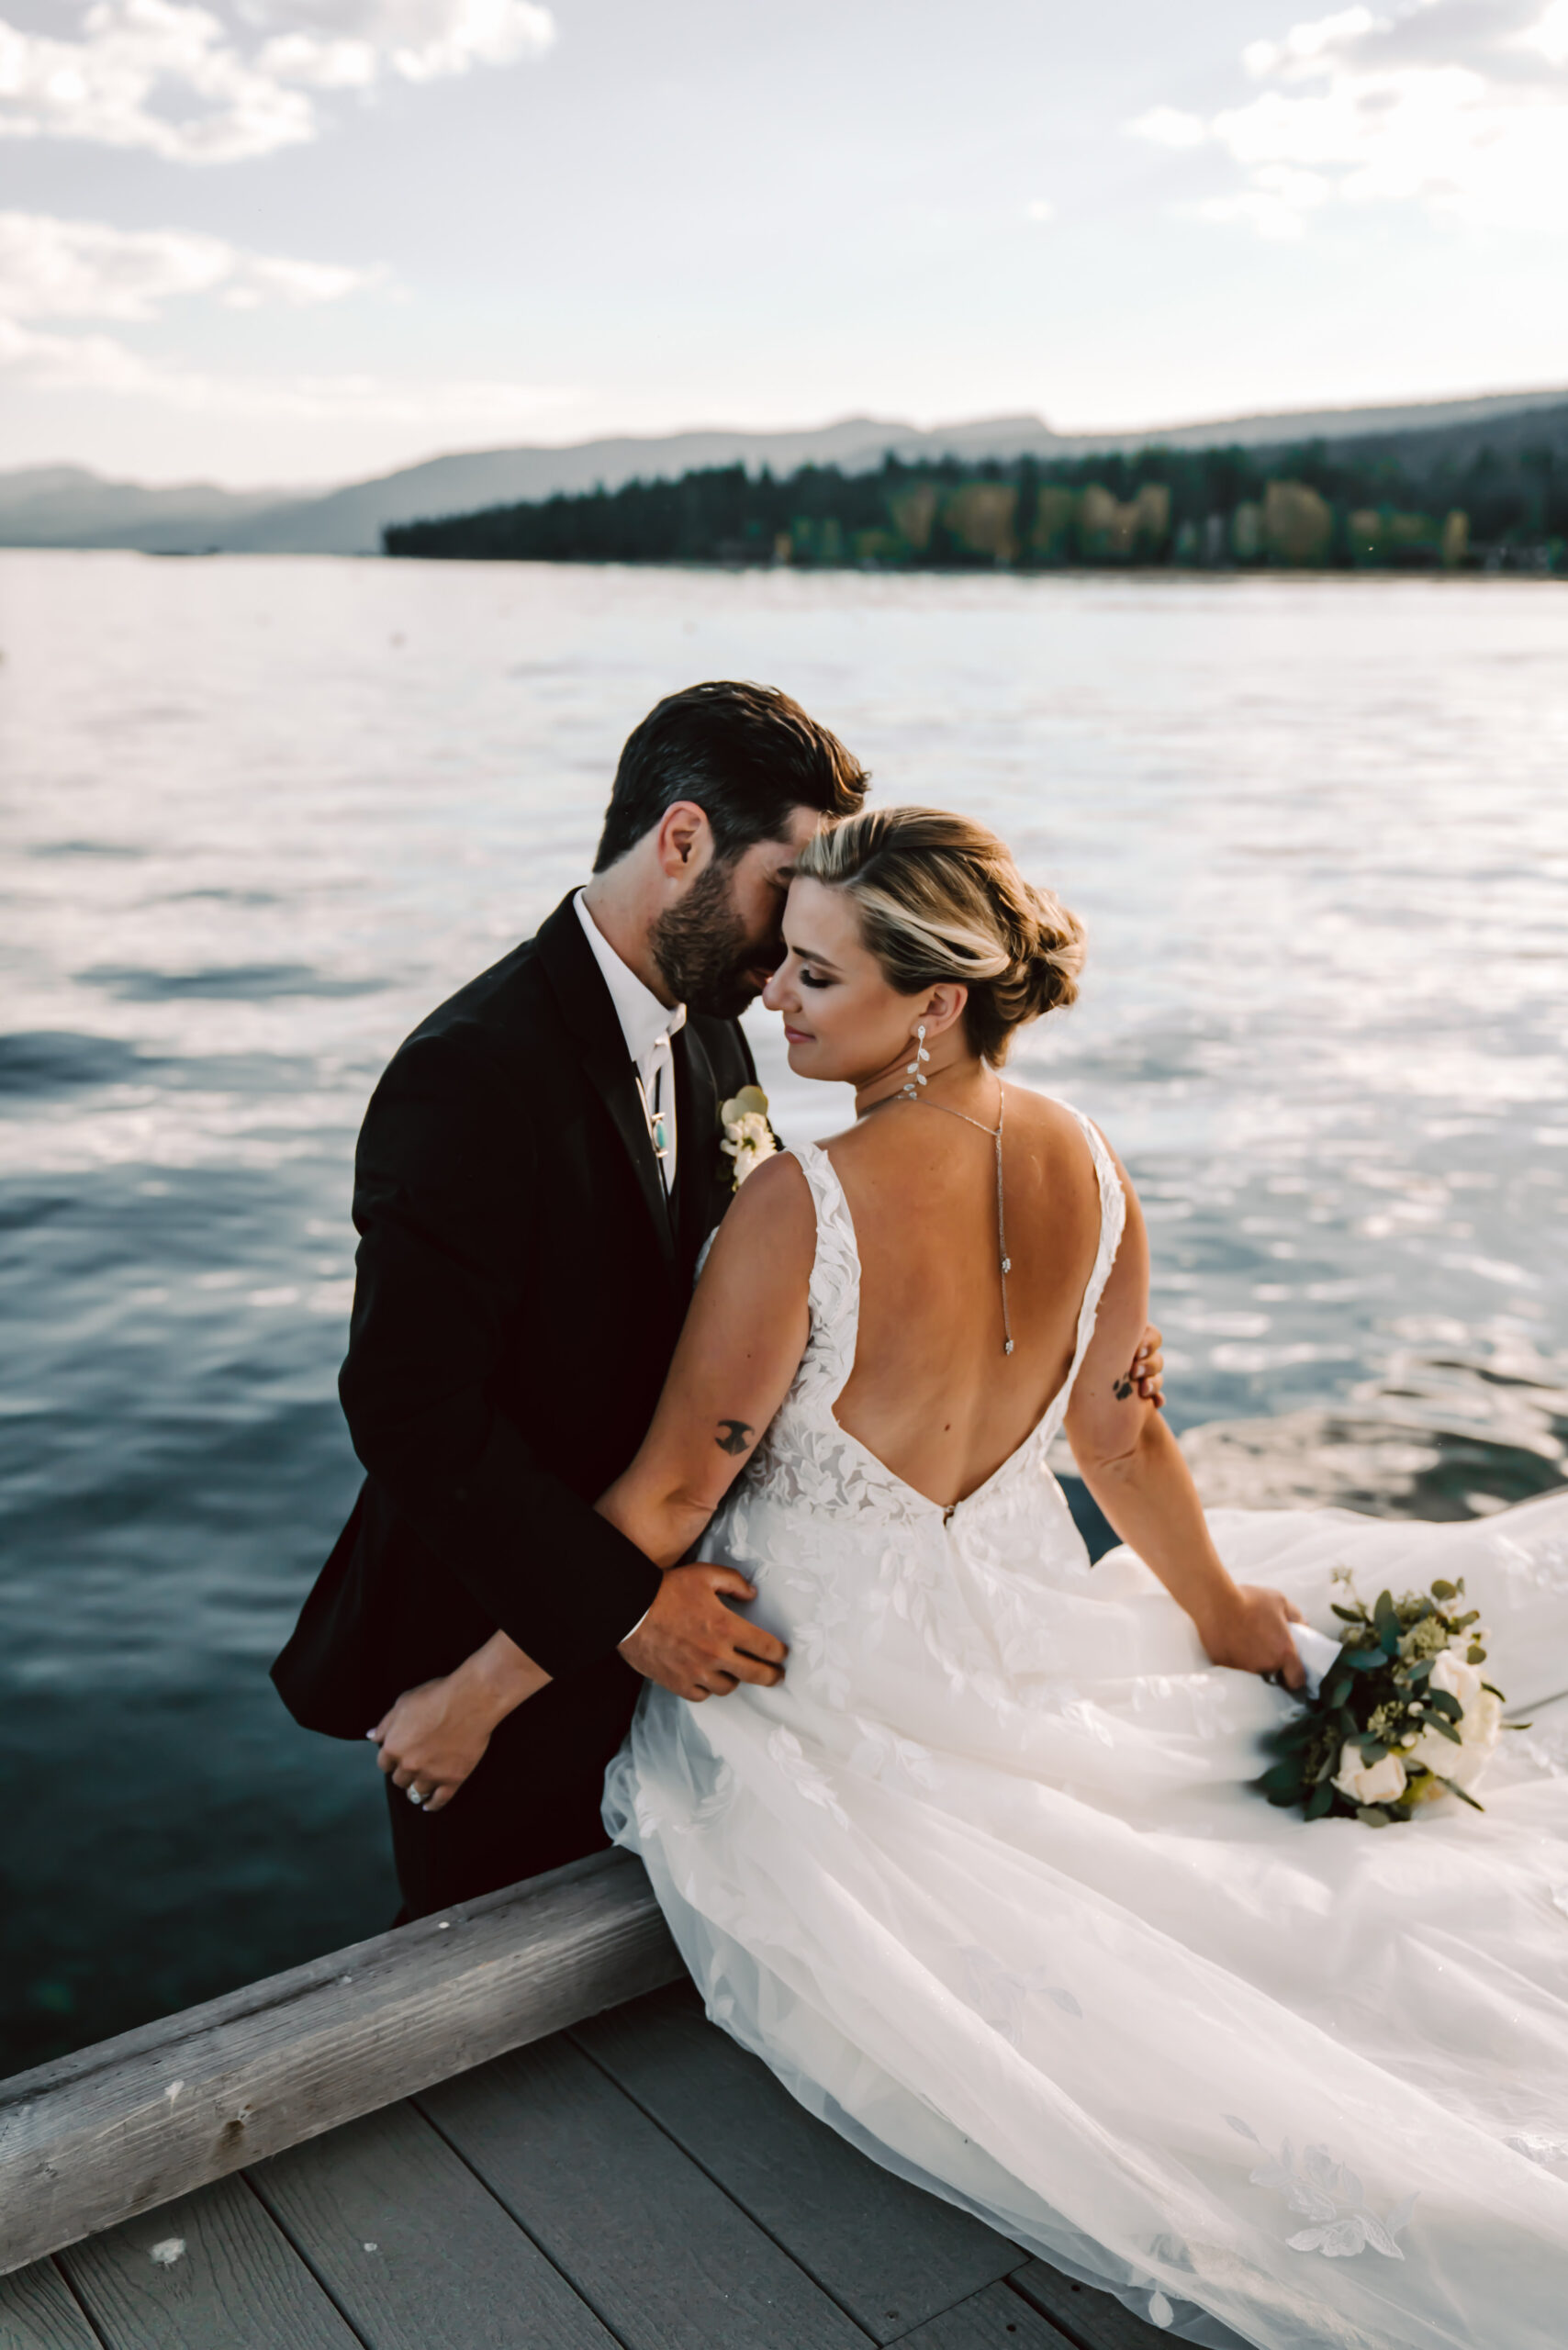 An groom whispering in his brides ear sitting on a dock in Lake Tahoe for their elopement day 